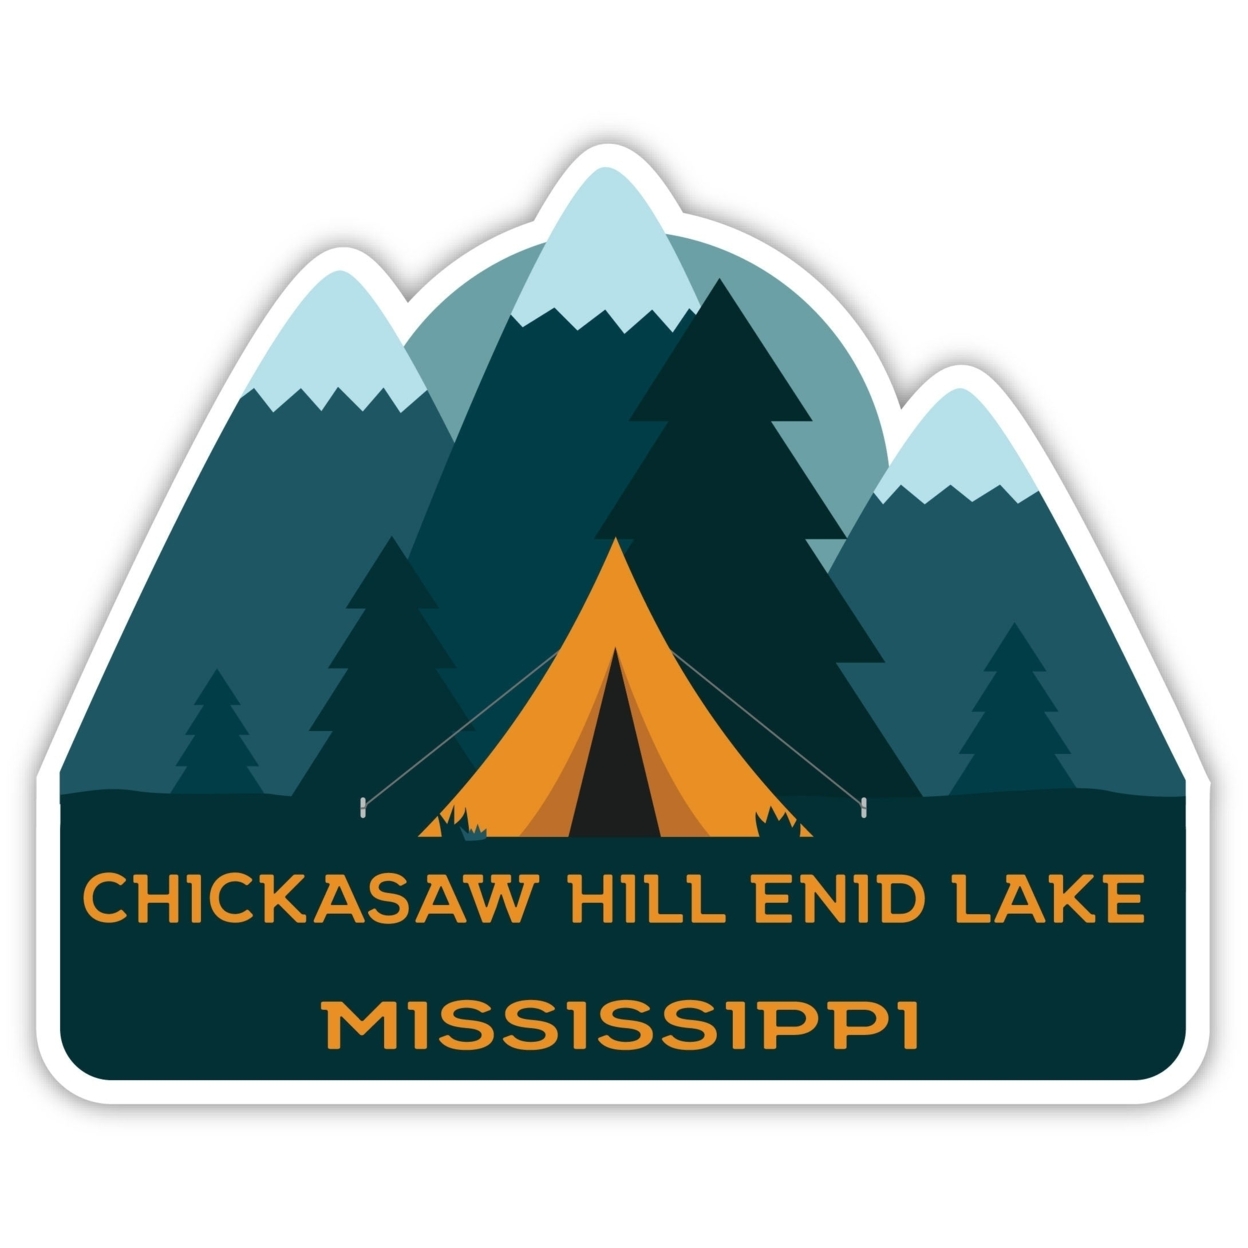 Chickasaw Hill Enid Lake Mississippi Souvenir Decorative Stickers (Choose Theme And Size) - 4-Pack, 12-Inch, Tent